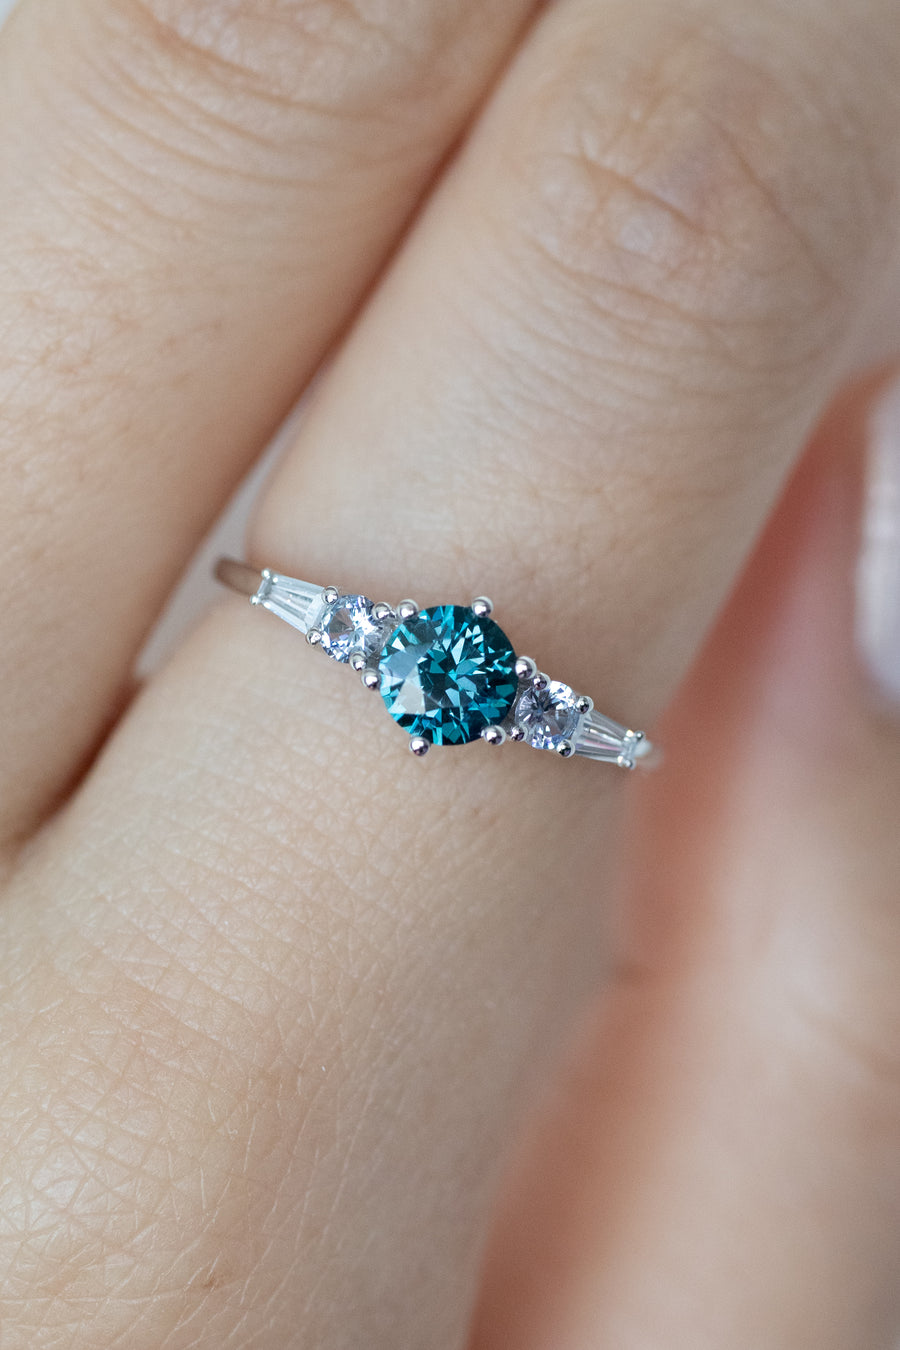 0.50carat Round Teal Spinel & total 0.27carat Round and Tapered Baguette Sapphires 14K White Gold Ring